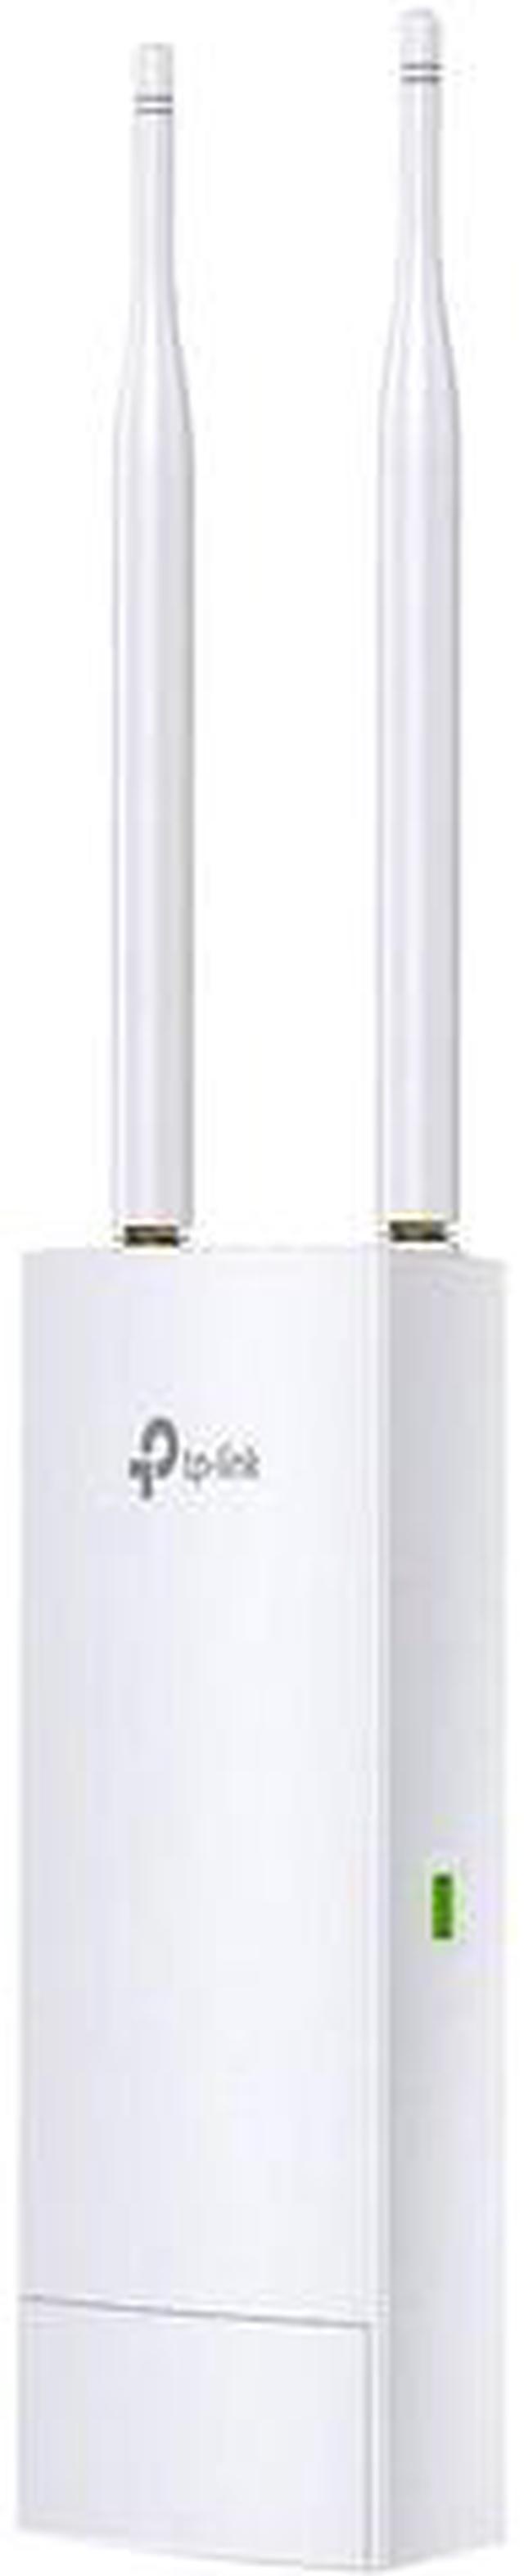 TP-Link EAP110 N300 Wireless N Outdoor Access Point